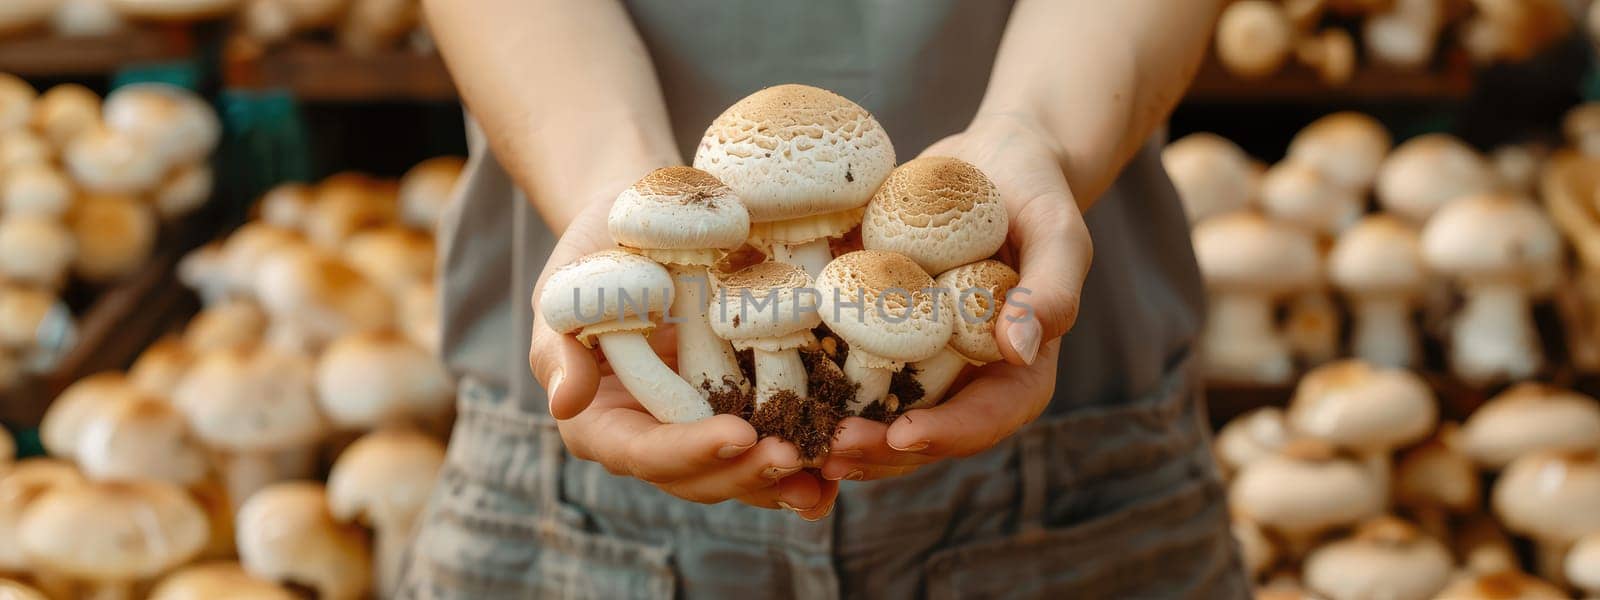 Champignon mushrooms in the hands of a woman in a greenhouse. Selective focus. nature.